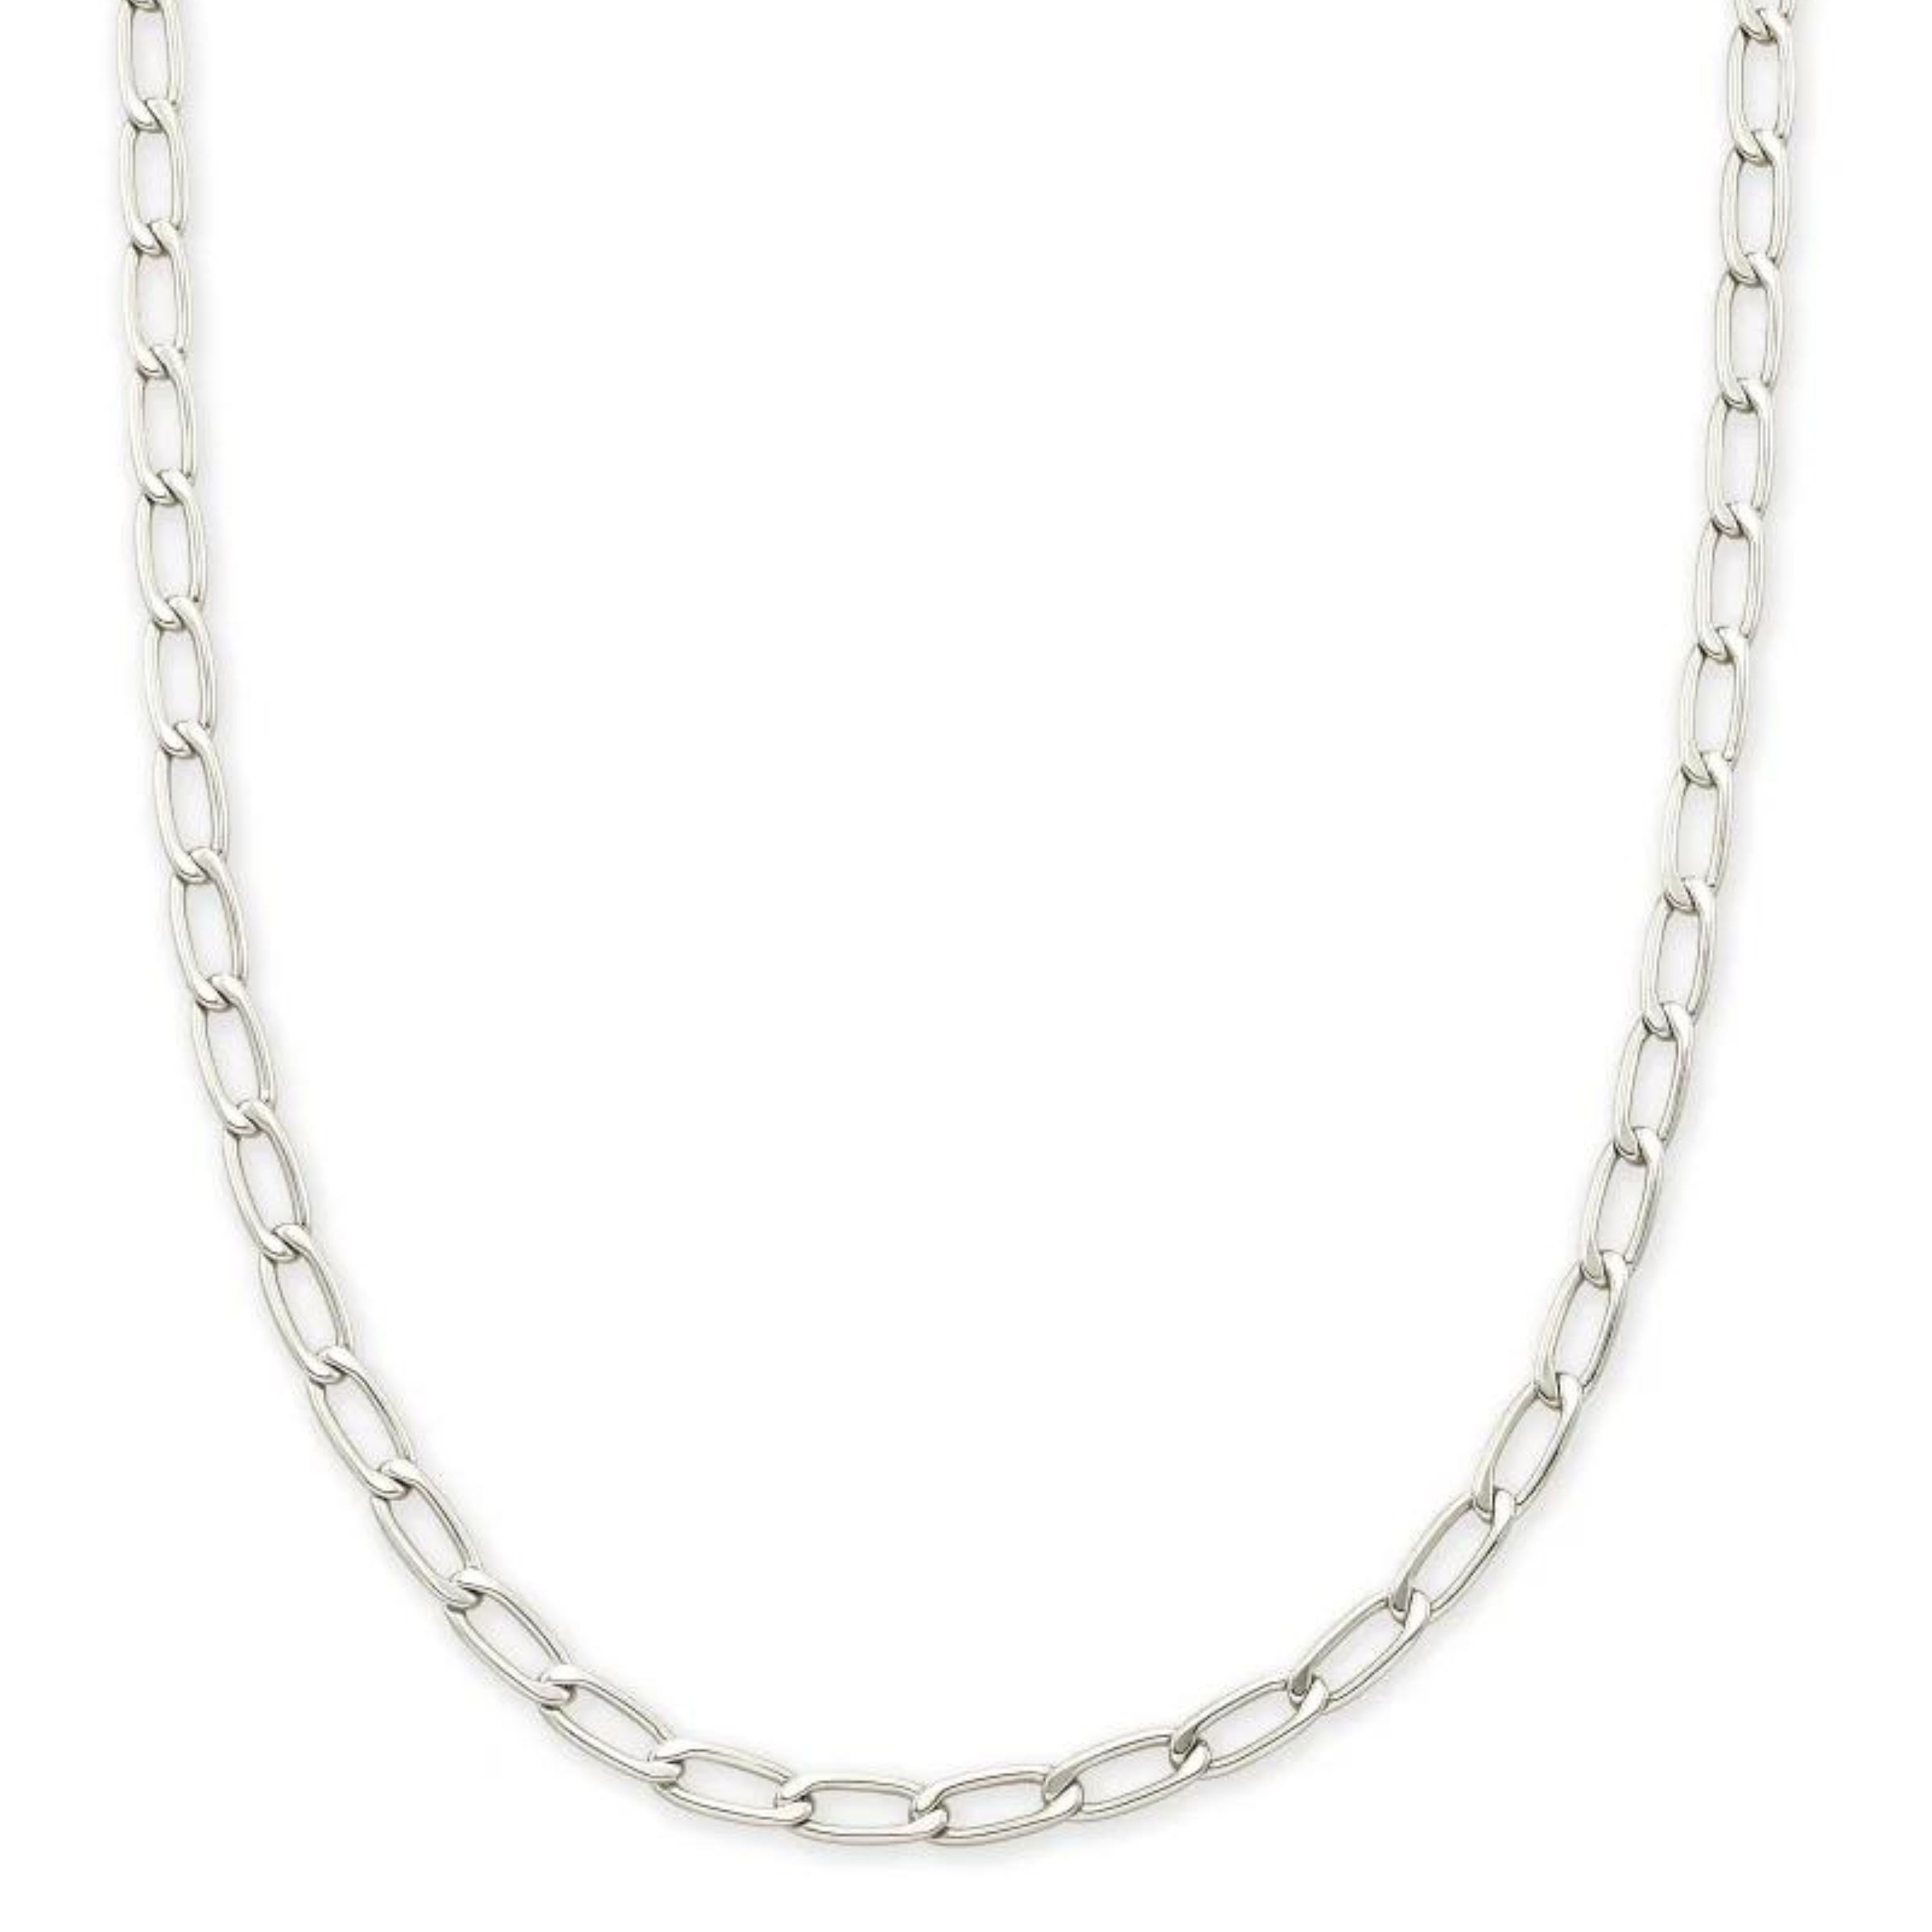 Silver chain necklace pictured on a white background.